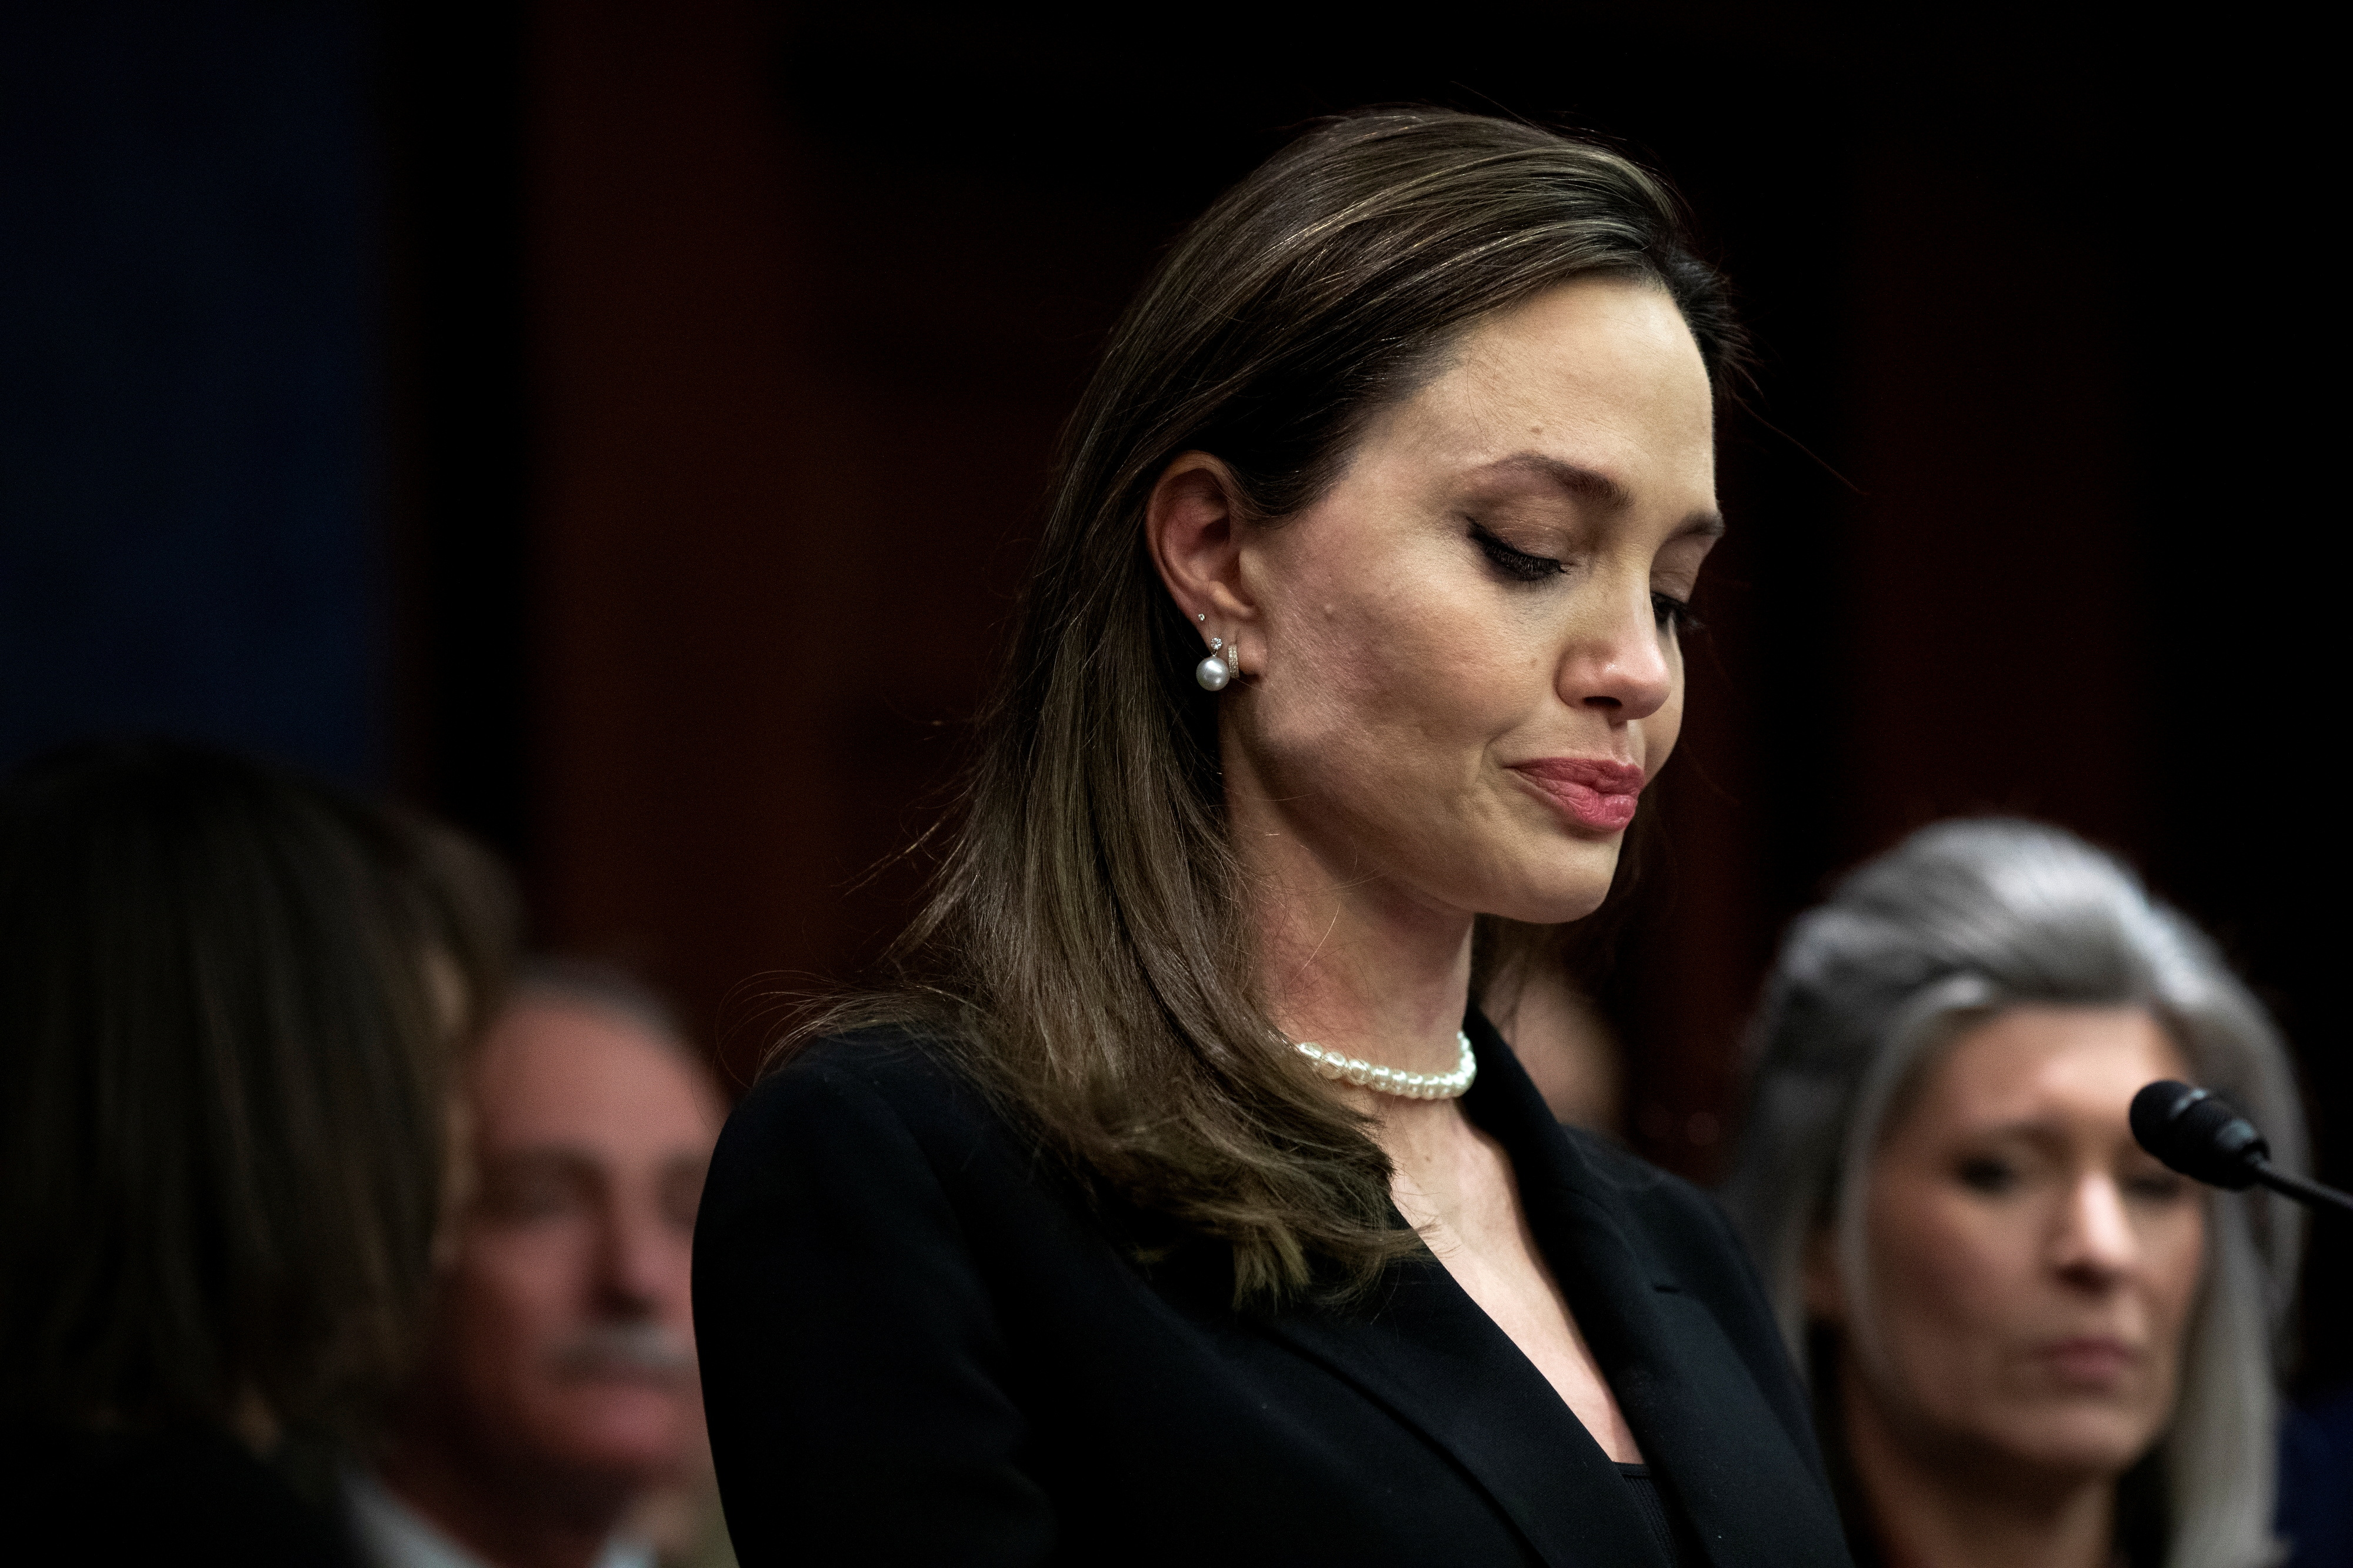 Angelina Jolie at the U.S. Capitol for the Violence Against Women Act in Washington